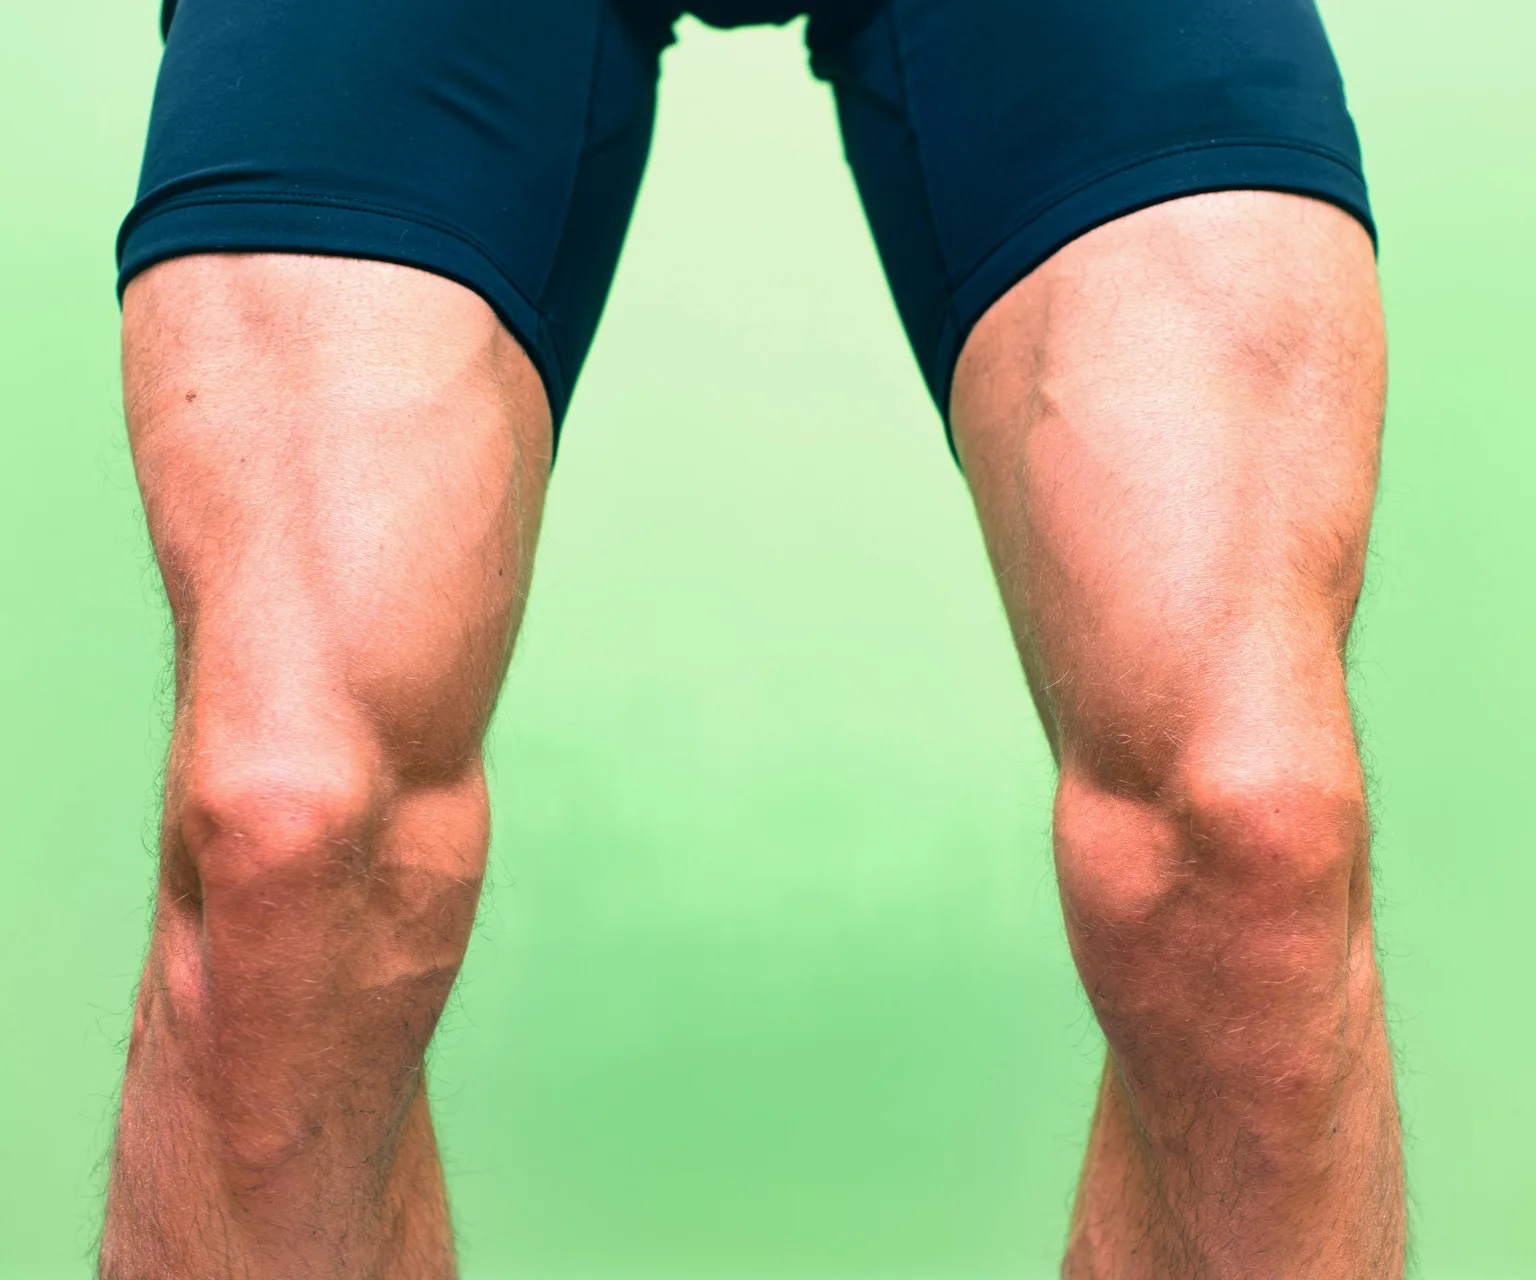 photo - Man's legs showing large developed quads muscles